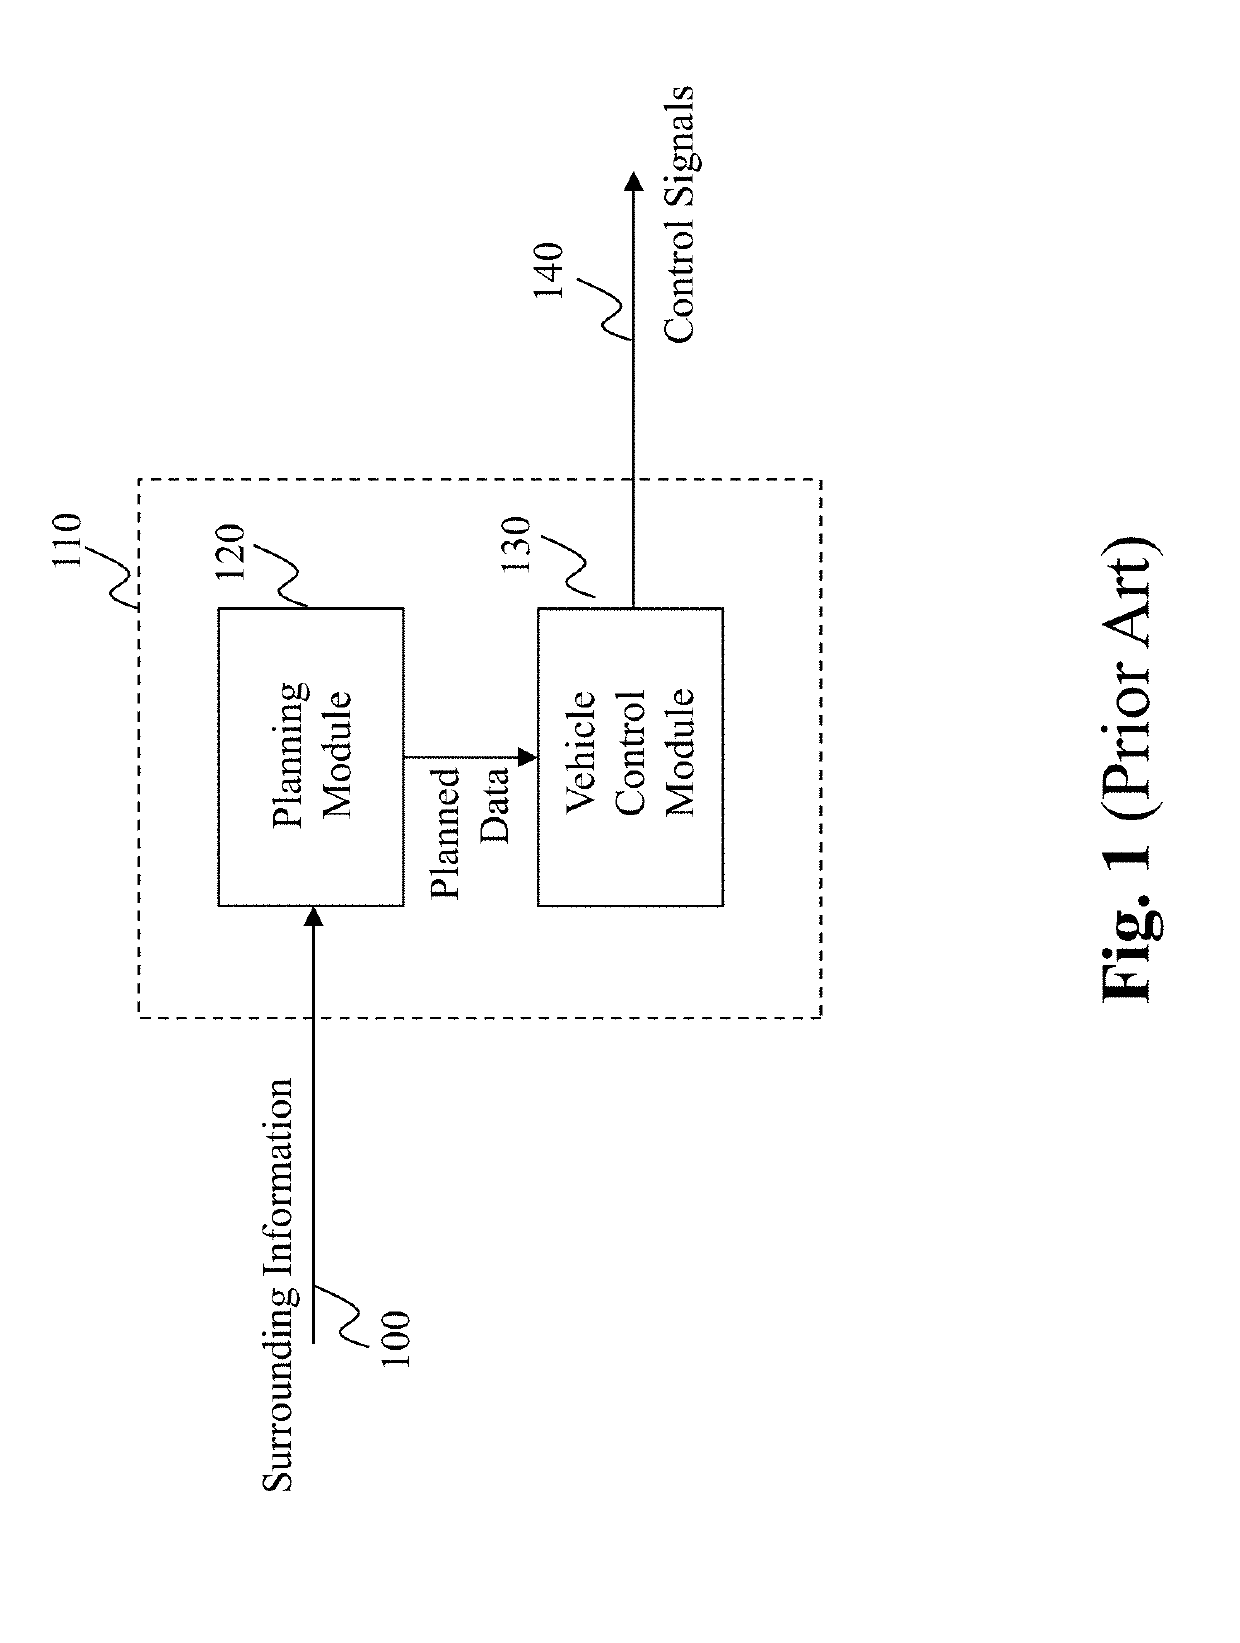 Method and system for self capability aware route planning in autonomous driving vehicles